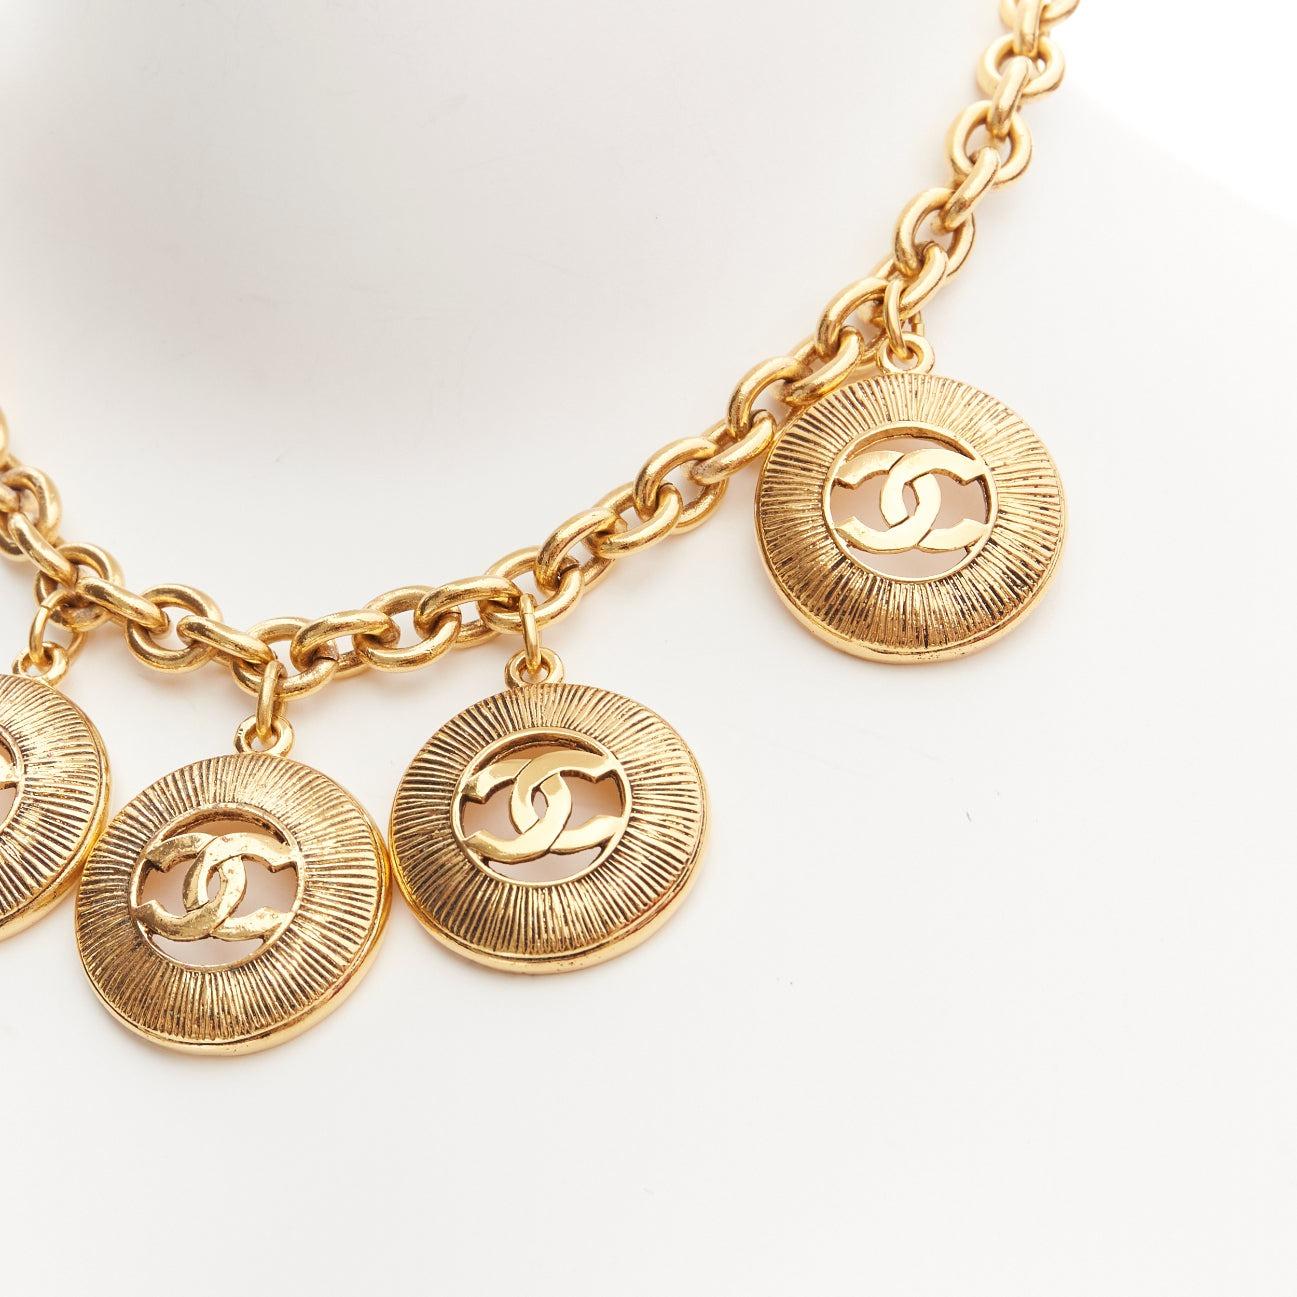 CHANEL Vintage gold CC medallion coin charm short chain necklace
Reference: TGAS/D00863
Brand: Chanel
Designer: Karl Lagerfeld
Collection: Circa 1990's
Material: Metal
Color: Gold
Pattern: Solid
Closure: Lobster Clasp
Lining: Gold Metal
Made in: